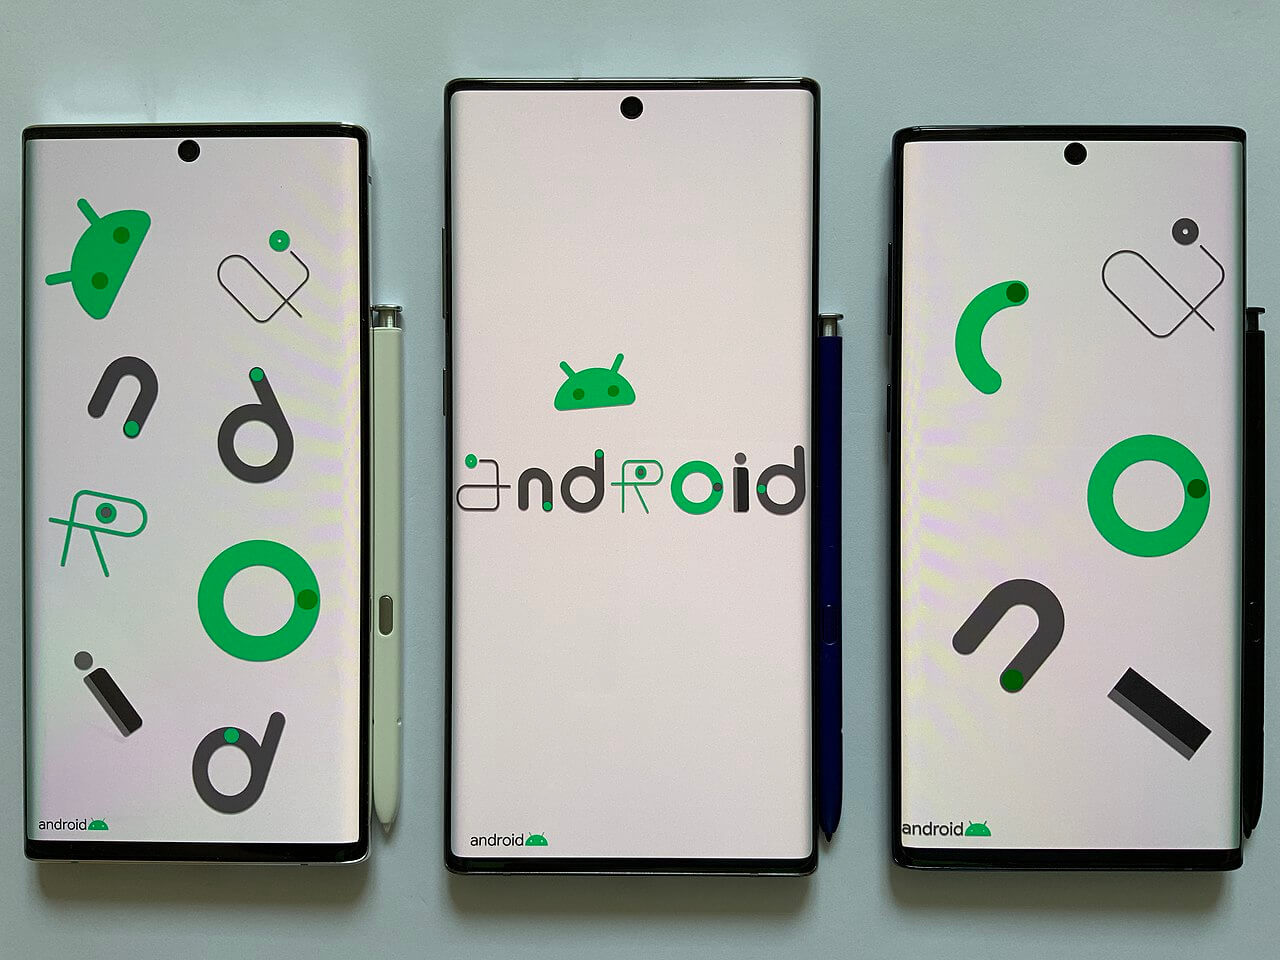 Google Android stock wallpapers on SAMSUNG Galaxy Note10+ 5G. Credit https://commons.wikimedia.org/wiki/File:Android_Phone_(light_mode).jpg